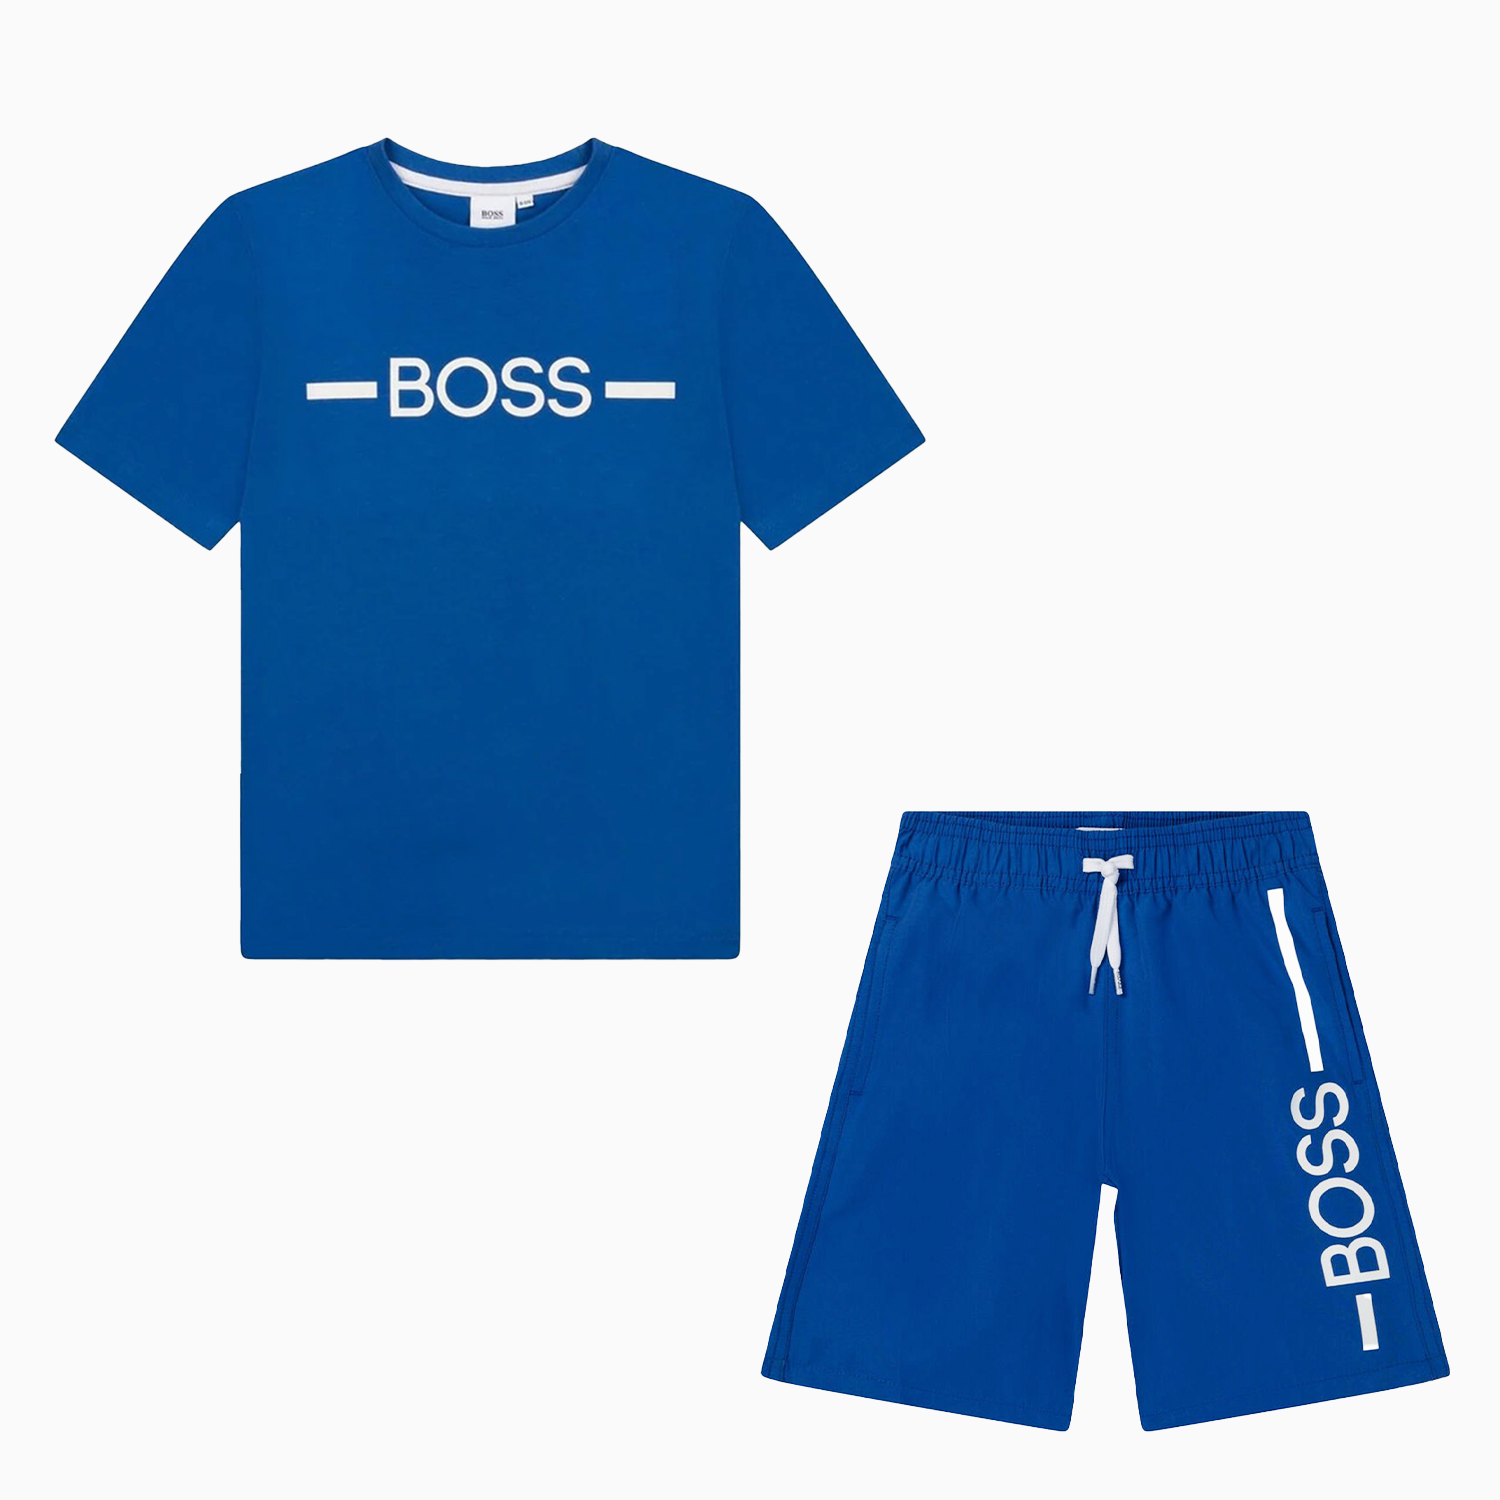 Hugo Boss Kid's Surfer Outfit - Color: Electric Blue - Kids Premium Clothing -